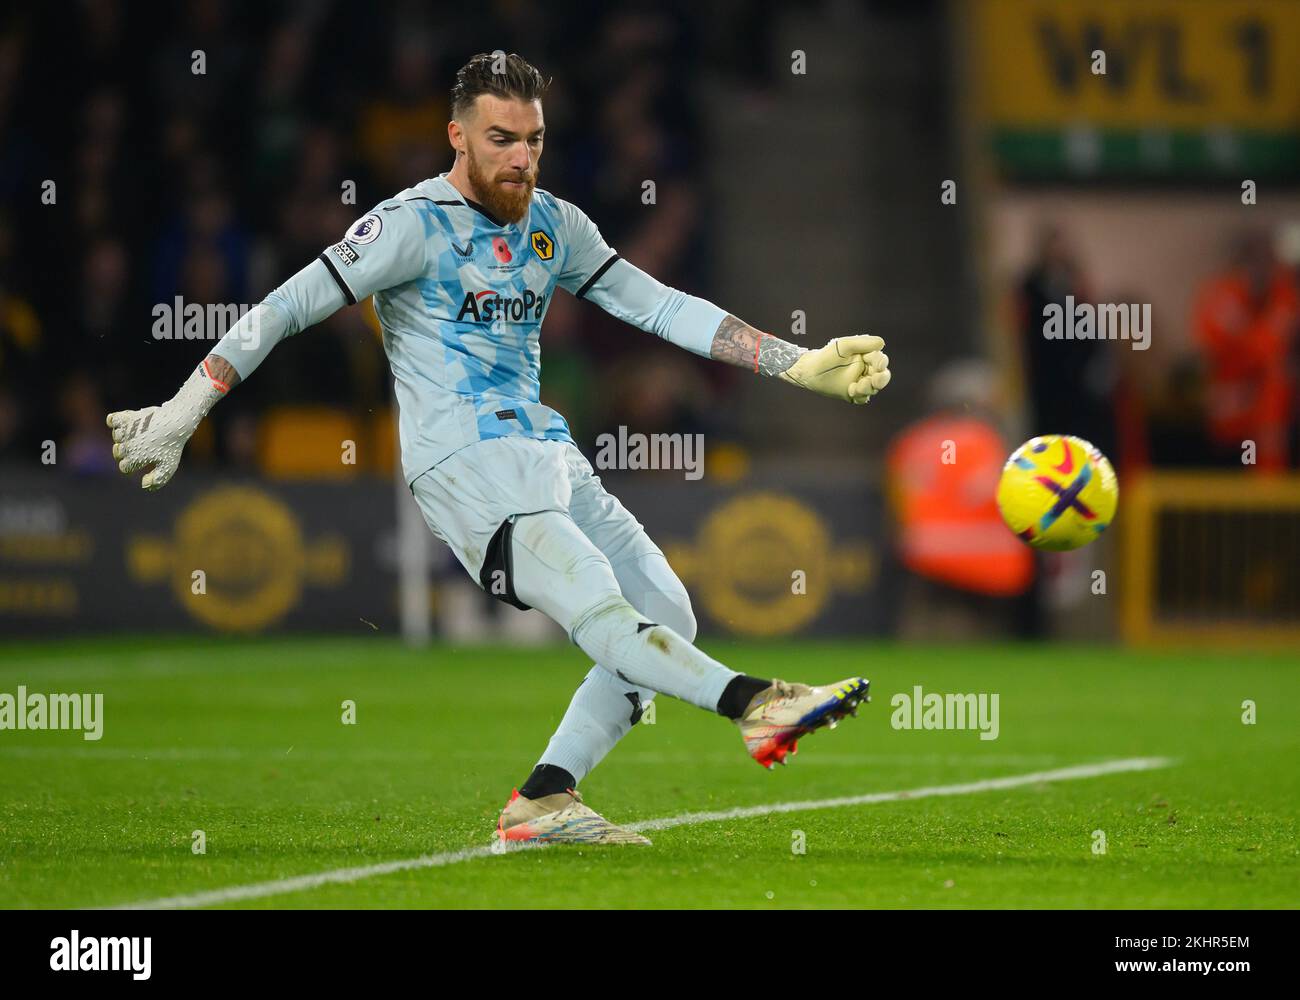 12 Nov 2022 - Wolverhampton Wanderers v Arsenal - Premier League - Molineux  Wolverhampton Wanderers' Jose Sa during the match against Arsenal.  Picture : Mark Pain / Alamy Live News Stock Photo